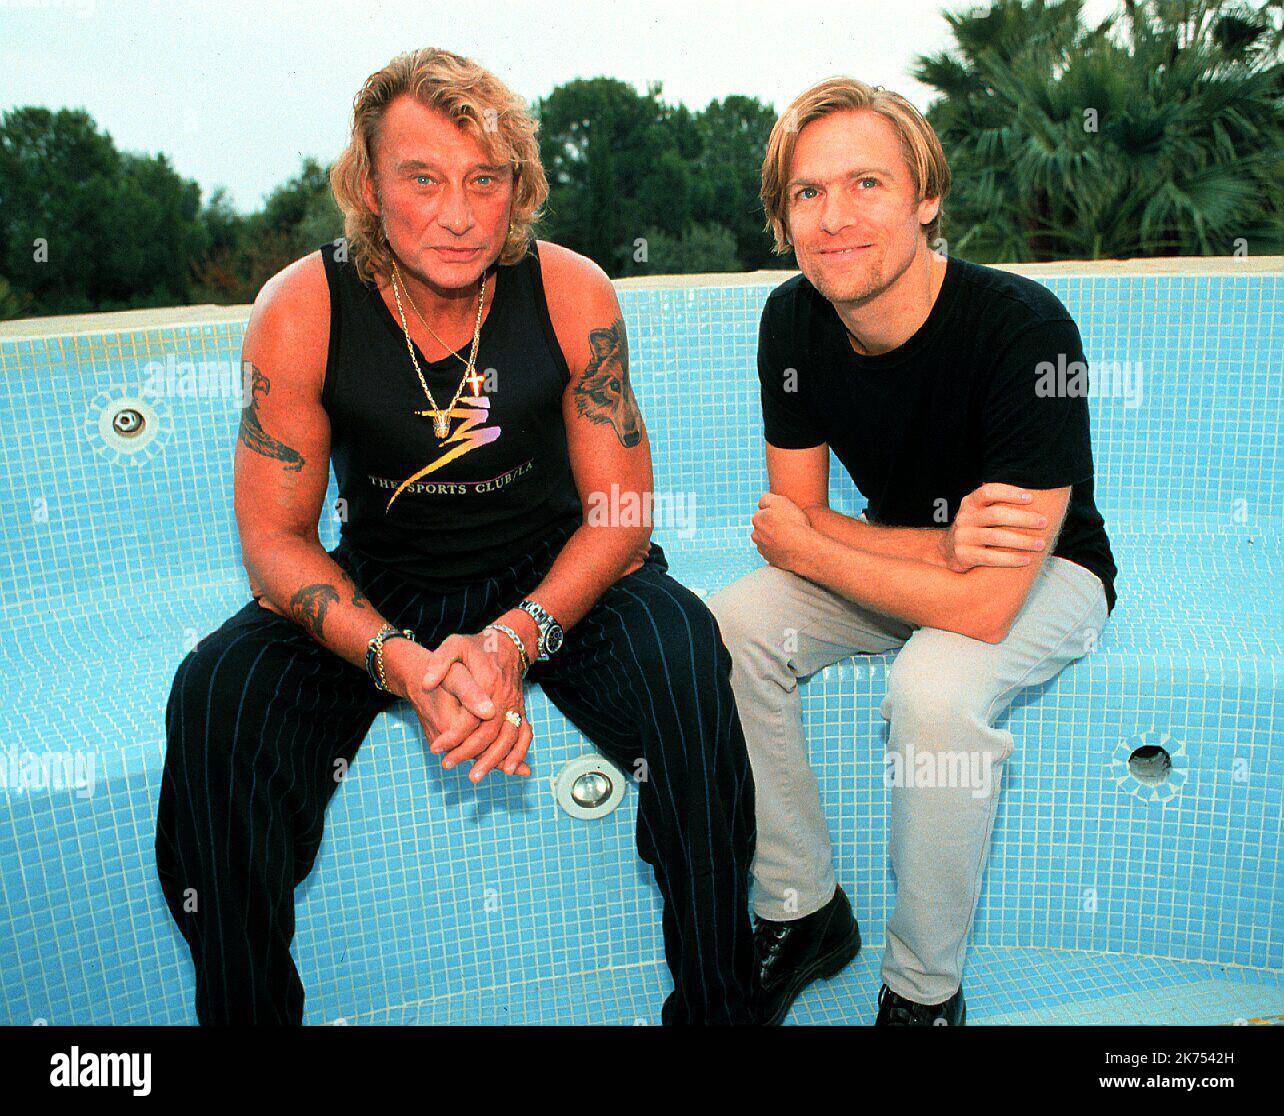 SAINT TROPEZ HALLYDAY OCTOBER 1995 WITH BRYAN ADAMS SINGER AT LAURADA      FILES - Johhny Hallyday, who became the first Gallic singer to popularize rock n' roll in France and sold over 110 million records during a music career spanning over half a century, has died. He was 74 and had been fighting cancer for several months. Widely known as the 'French Elvis,' Hallyday began his singing career at the end of the 1950s specializing in French-language cover versions of famous songs by artists like Gene Vincent, Eddie Cochrane and Elvis Presley, whose example inspired him to become a singer. Stock Photo